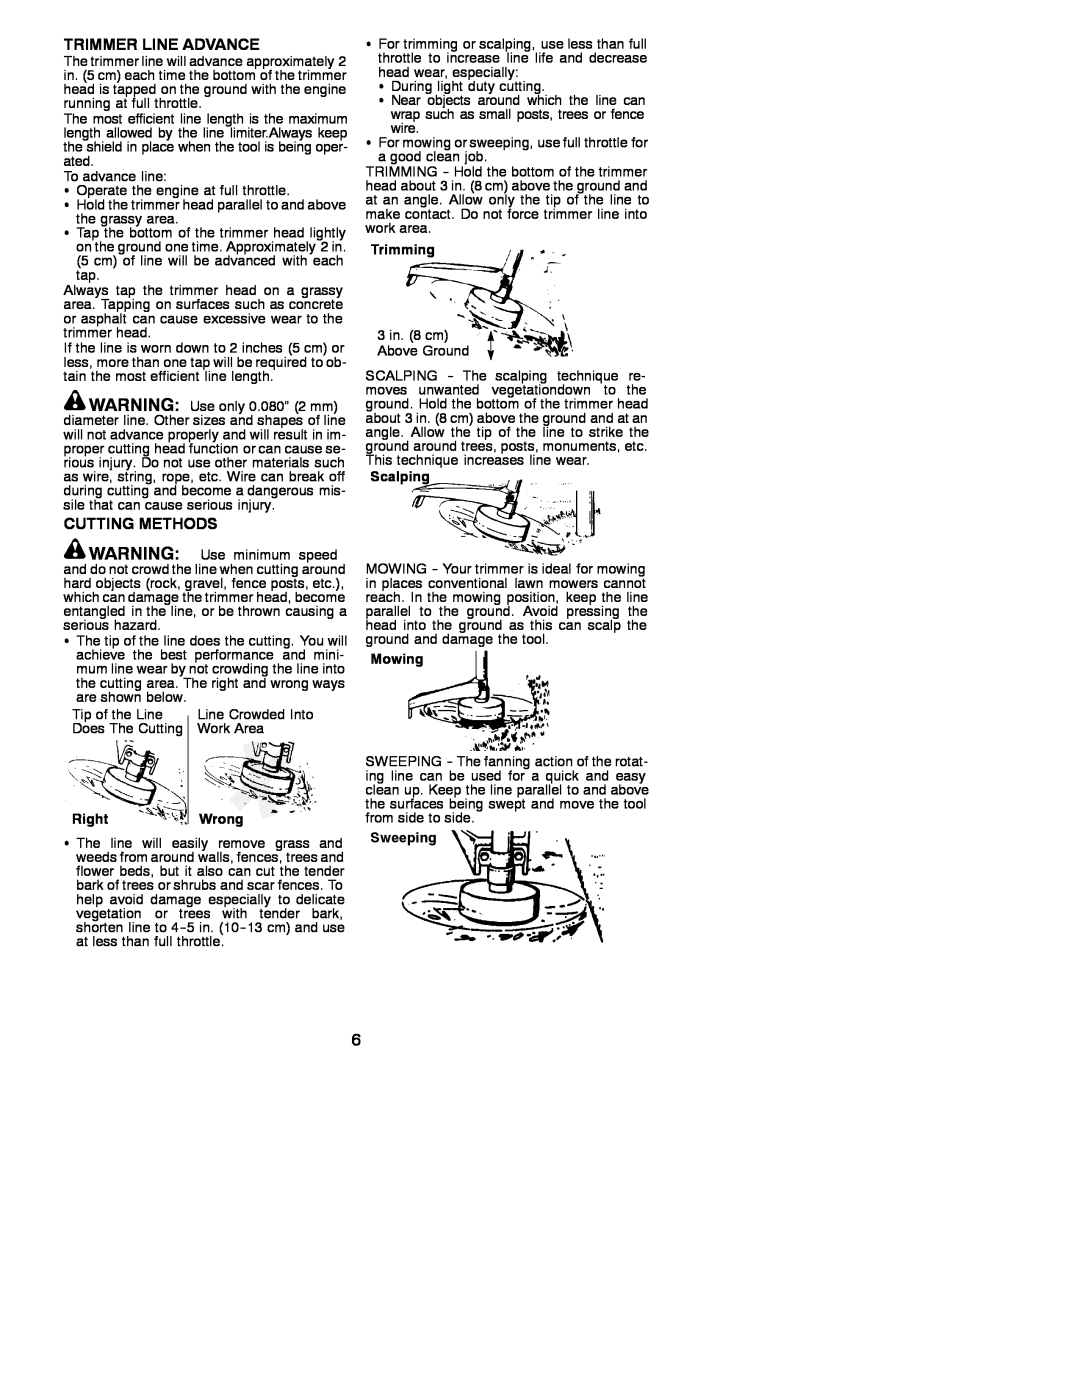 Weed Eater 530086924 instruction manual Trimmer Line Advance, Cutting Methods, Right, Trimming, Scalping, Mowing, Sweeping 